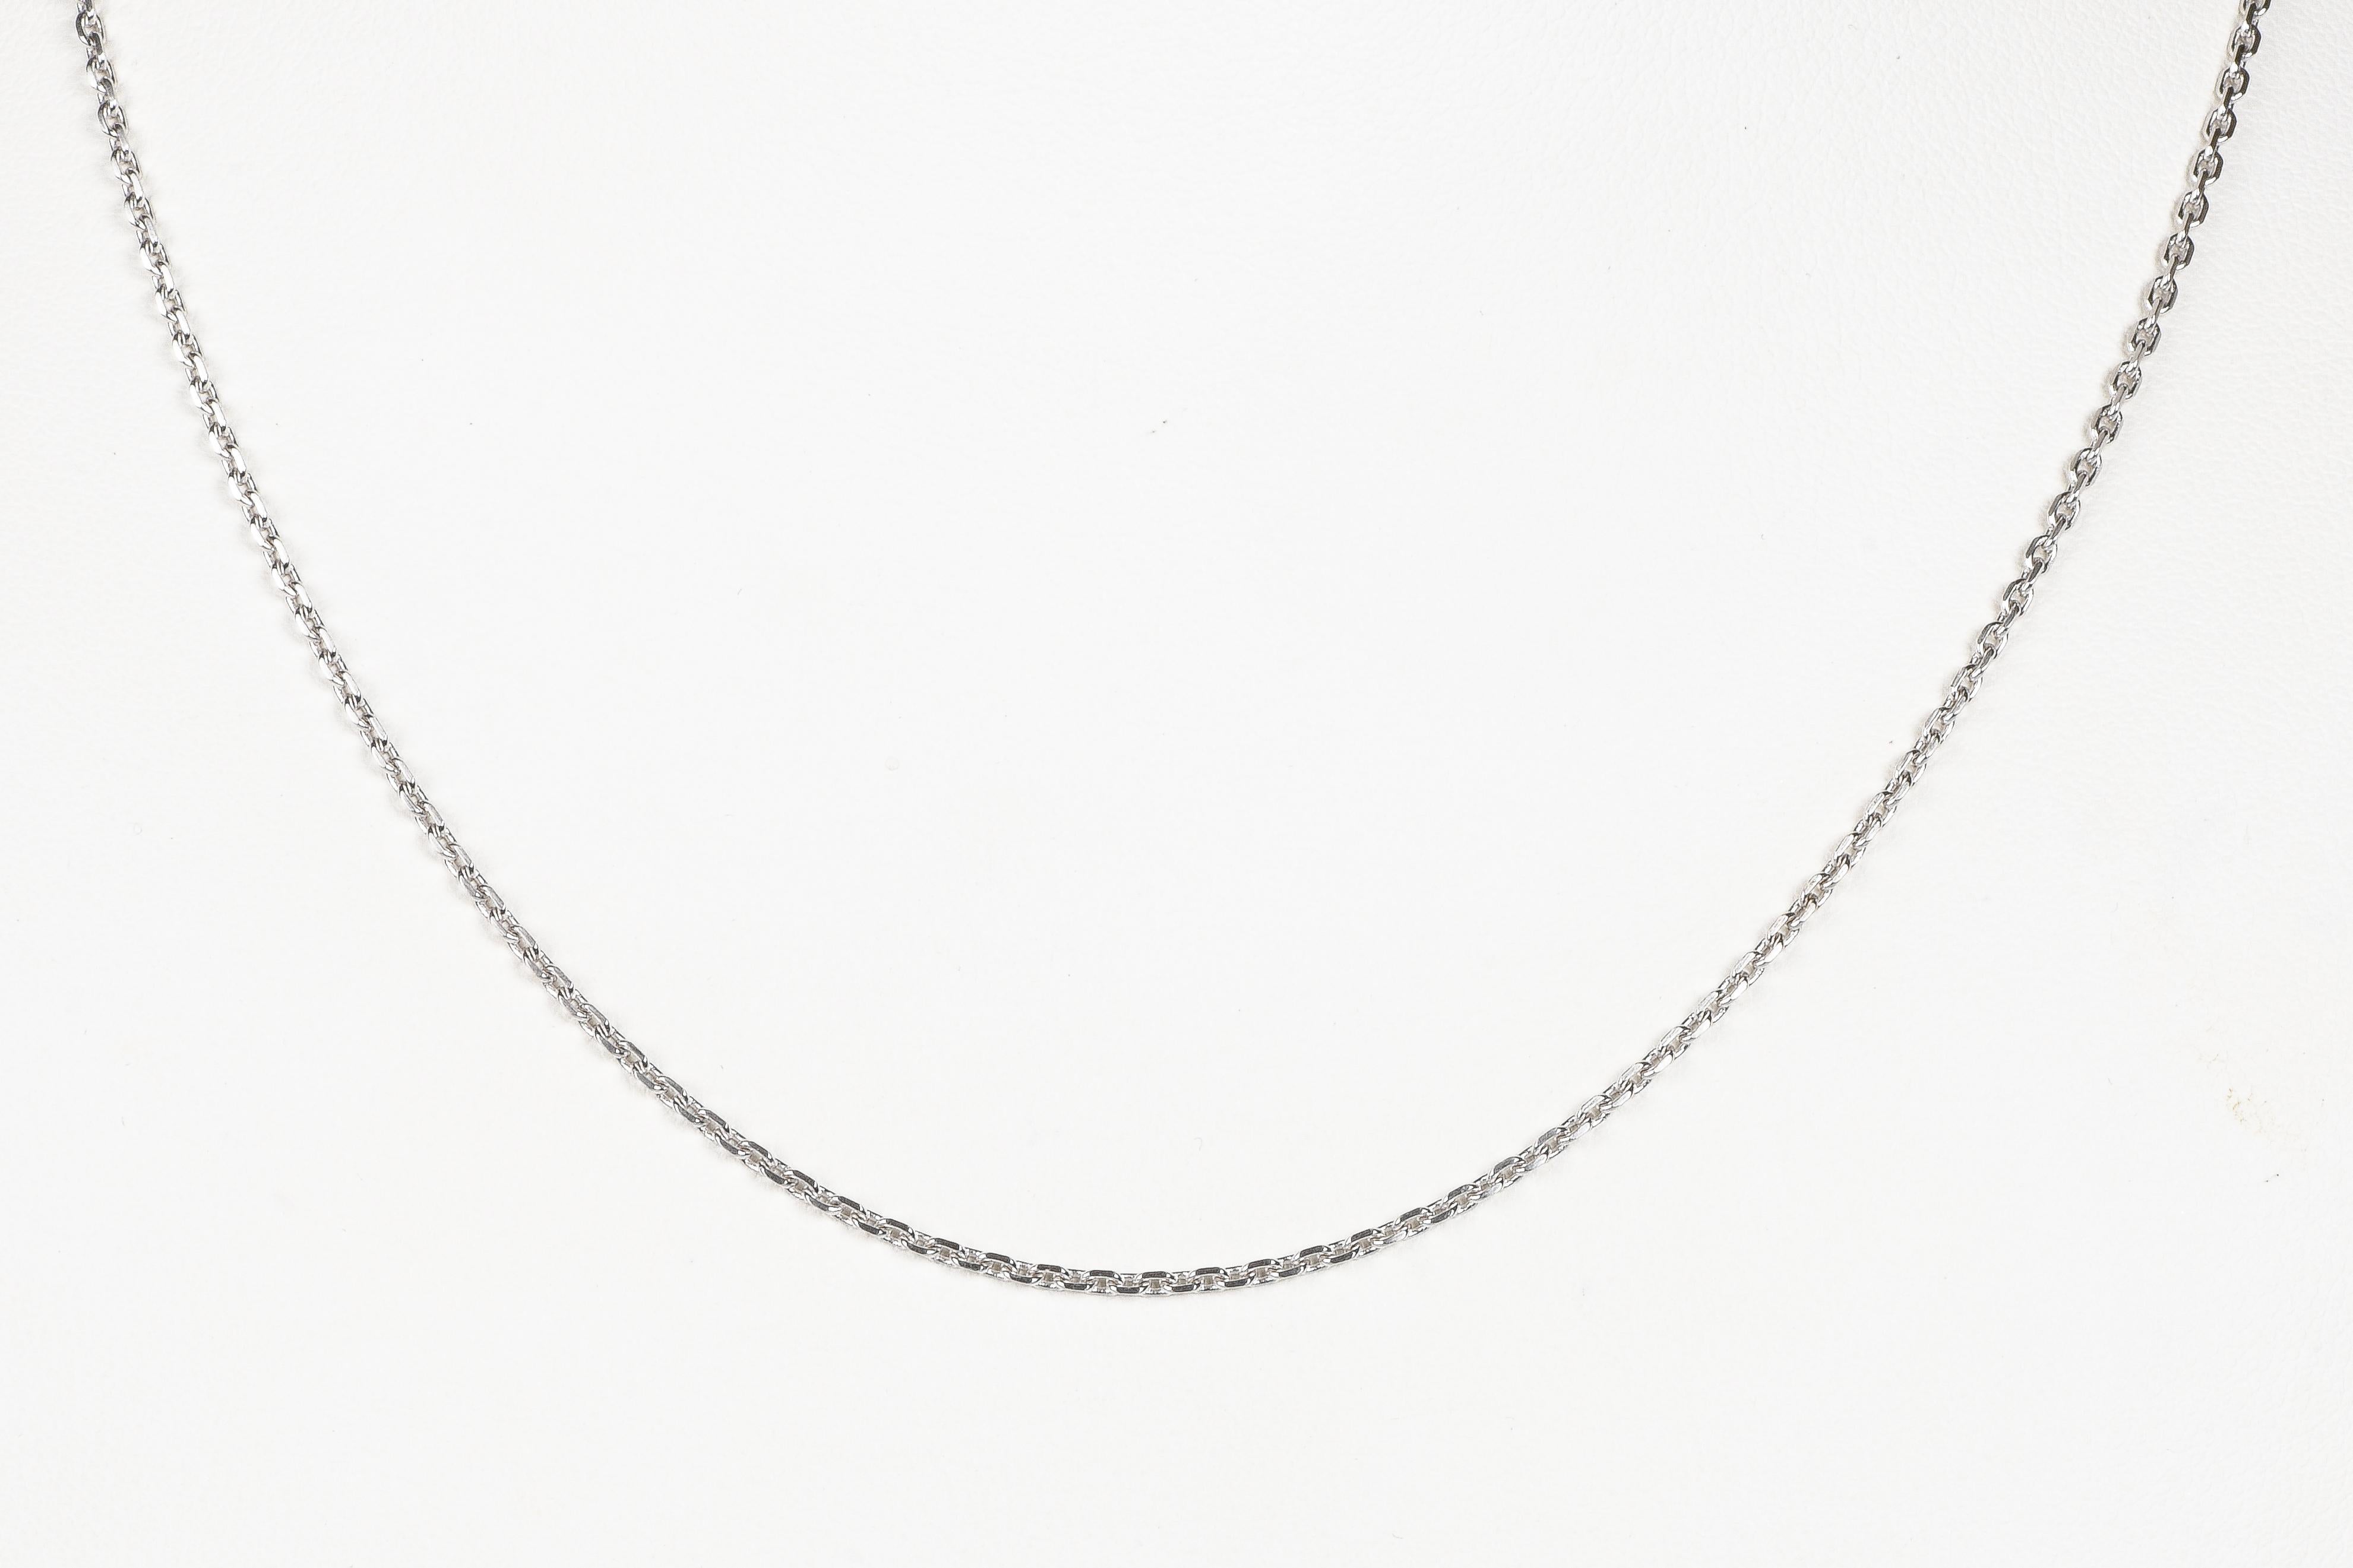 This 18k white gold chain is a perfect example of simplicity and elegance. The fine mesh of this chain creates a delicate and discreet appearance that makes it versatile and ideal to be worn alone or with a pendant. 18K white gold gives the chain a